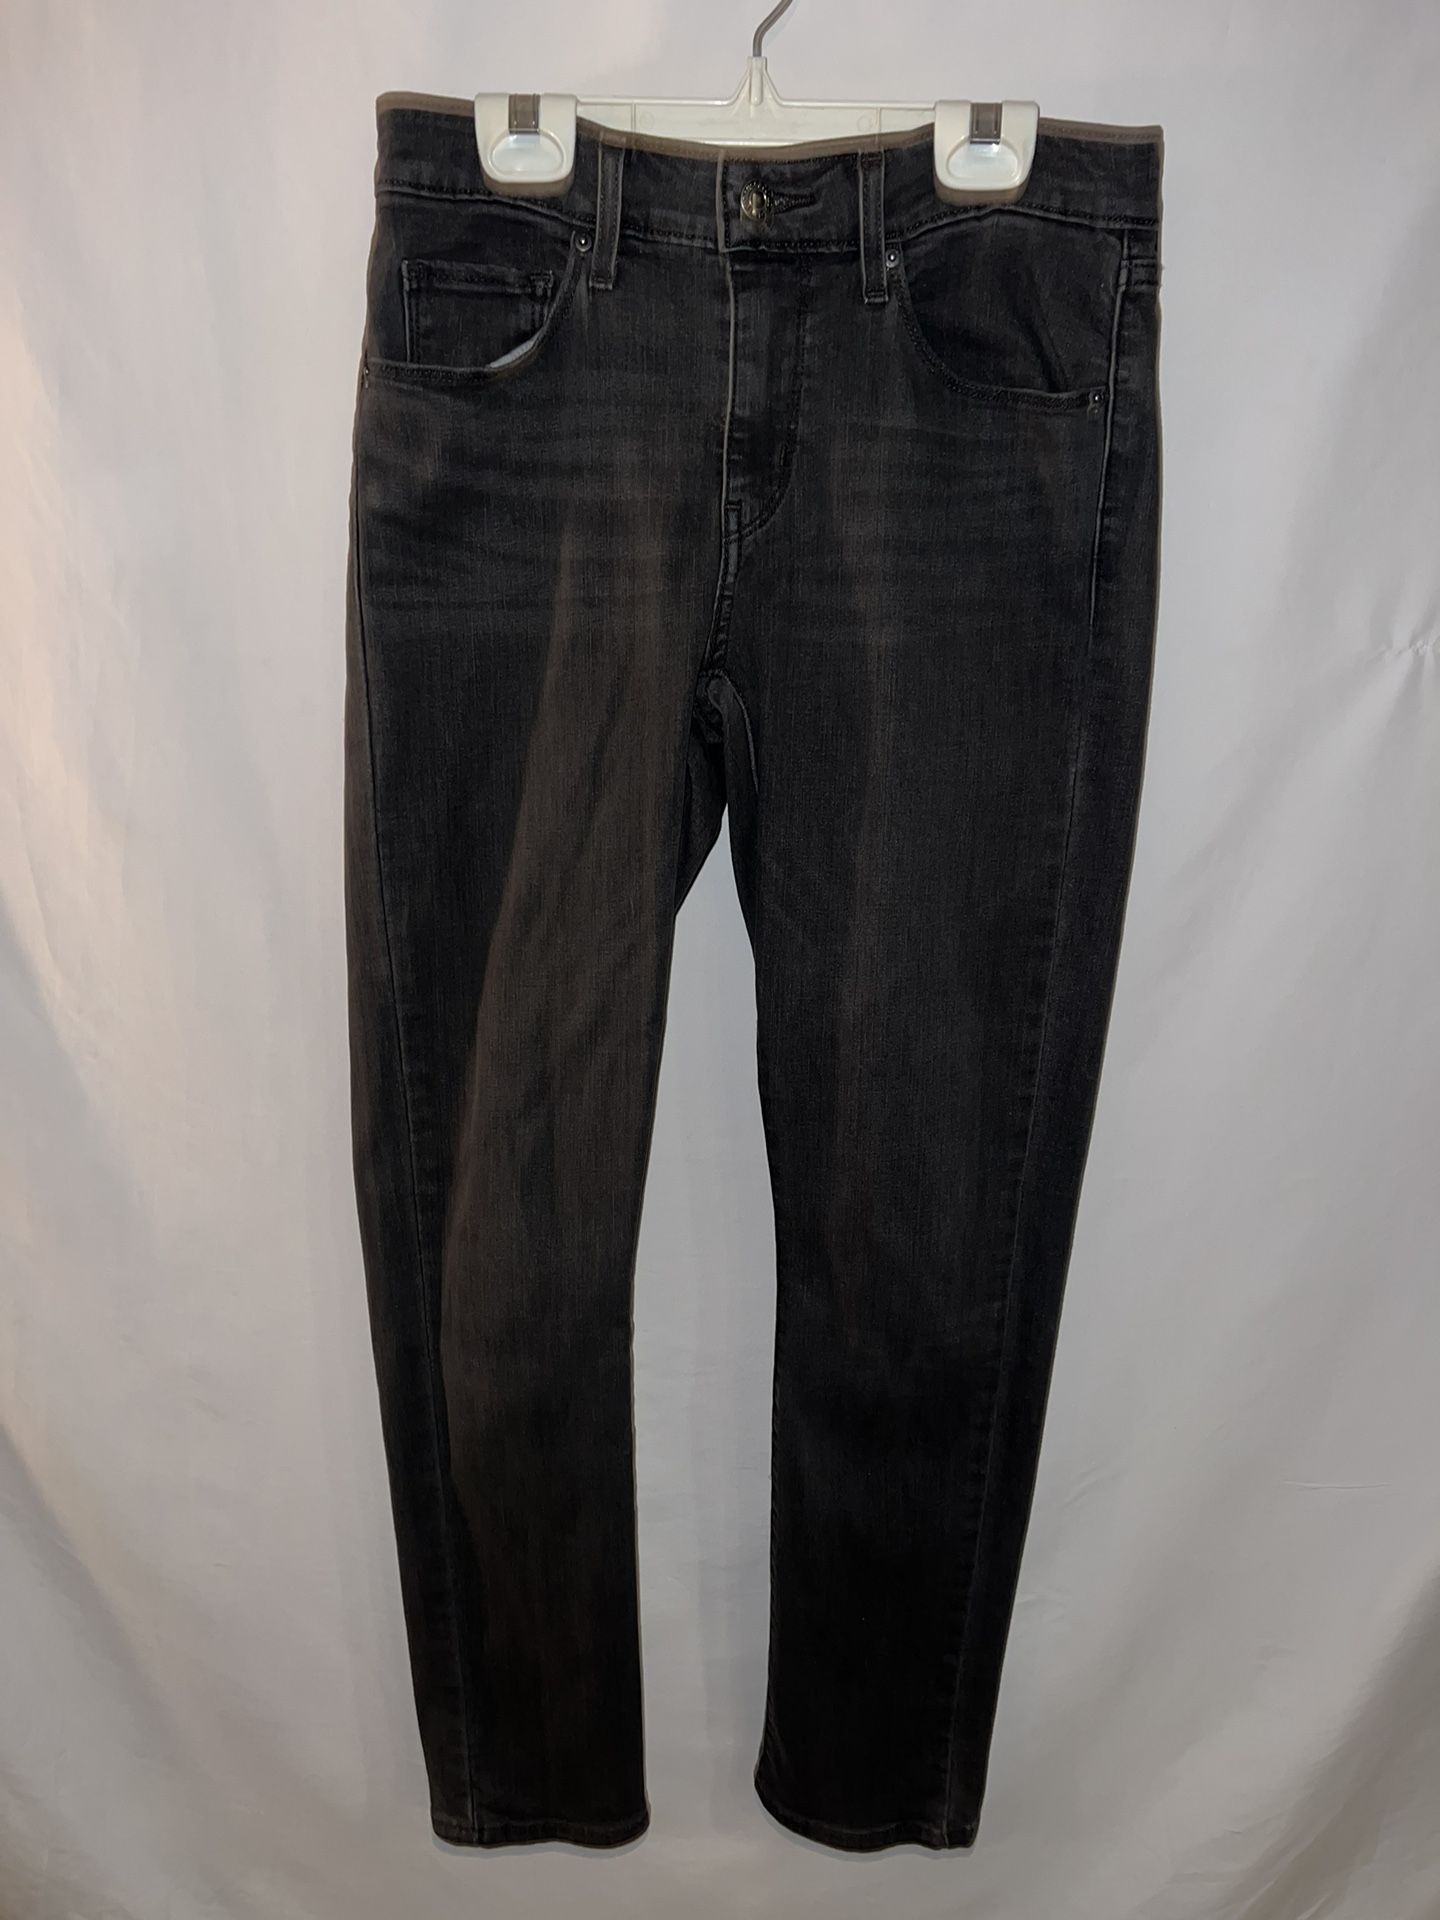 Ladies Levi’s size 6  classic mid rise skinny jeans in dark gray gorgeous color — in great condition.